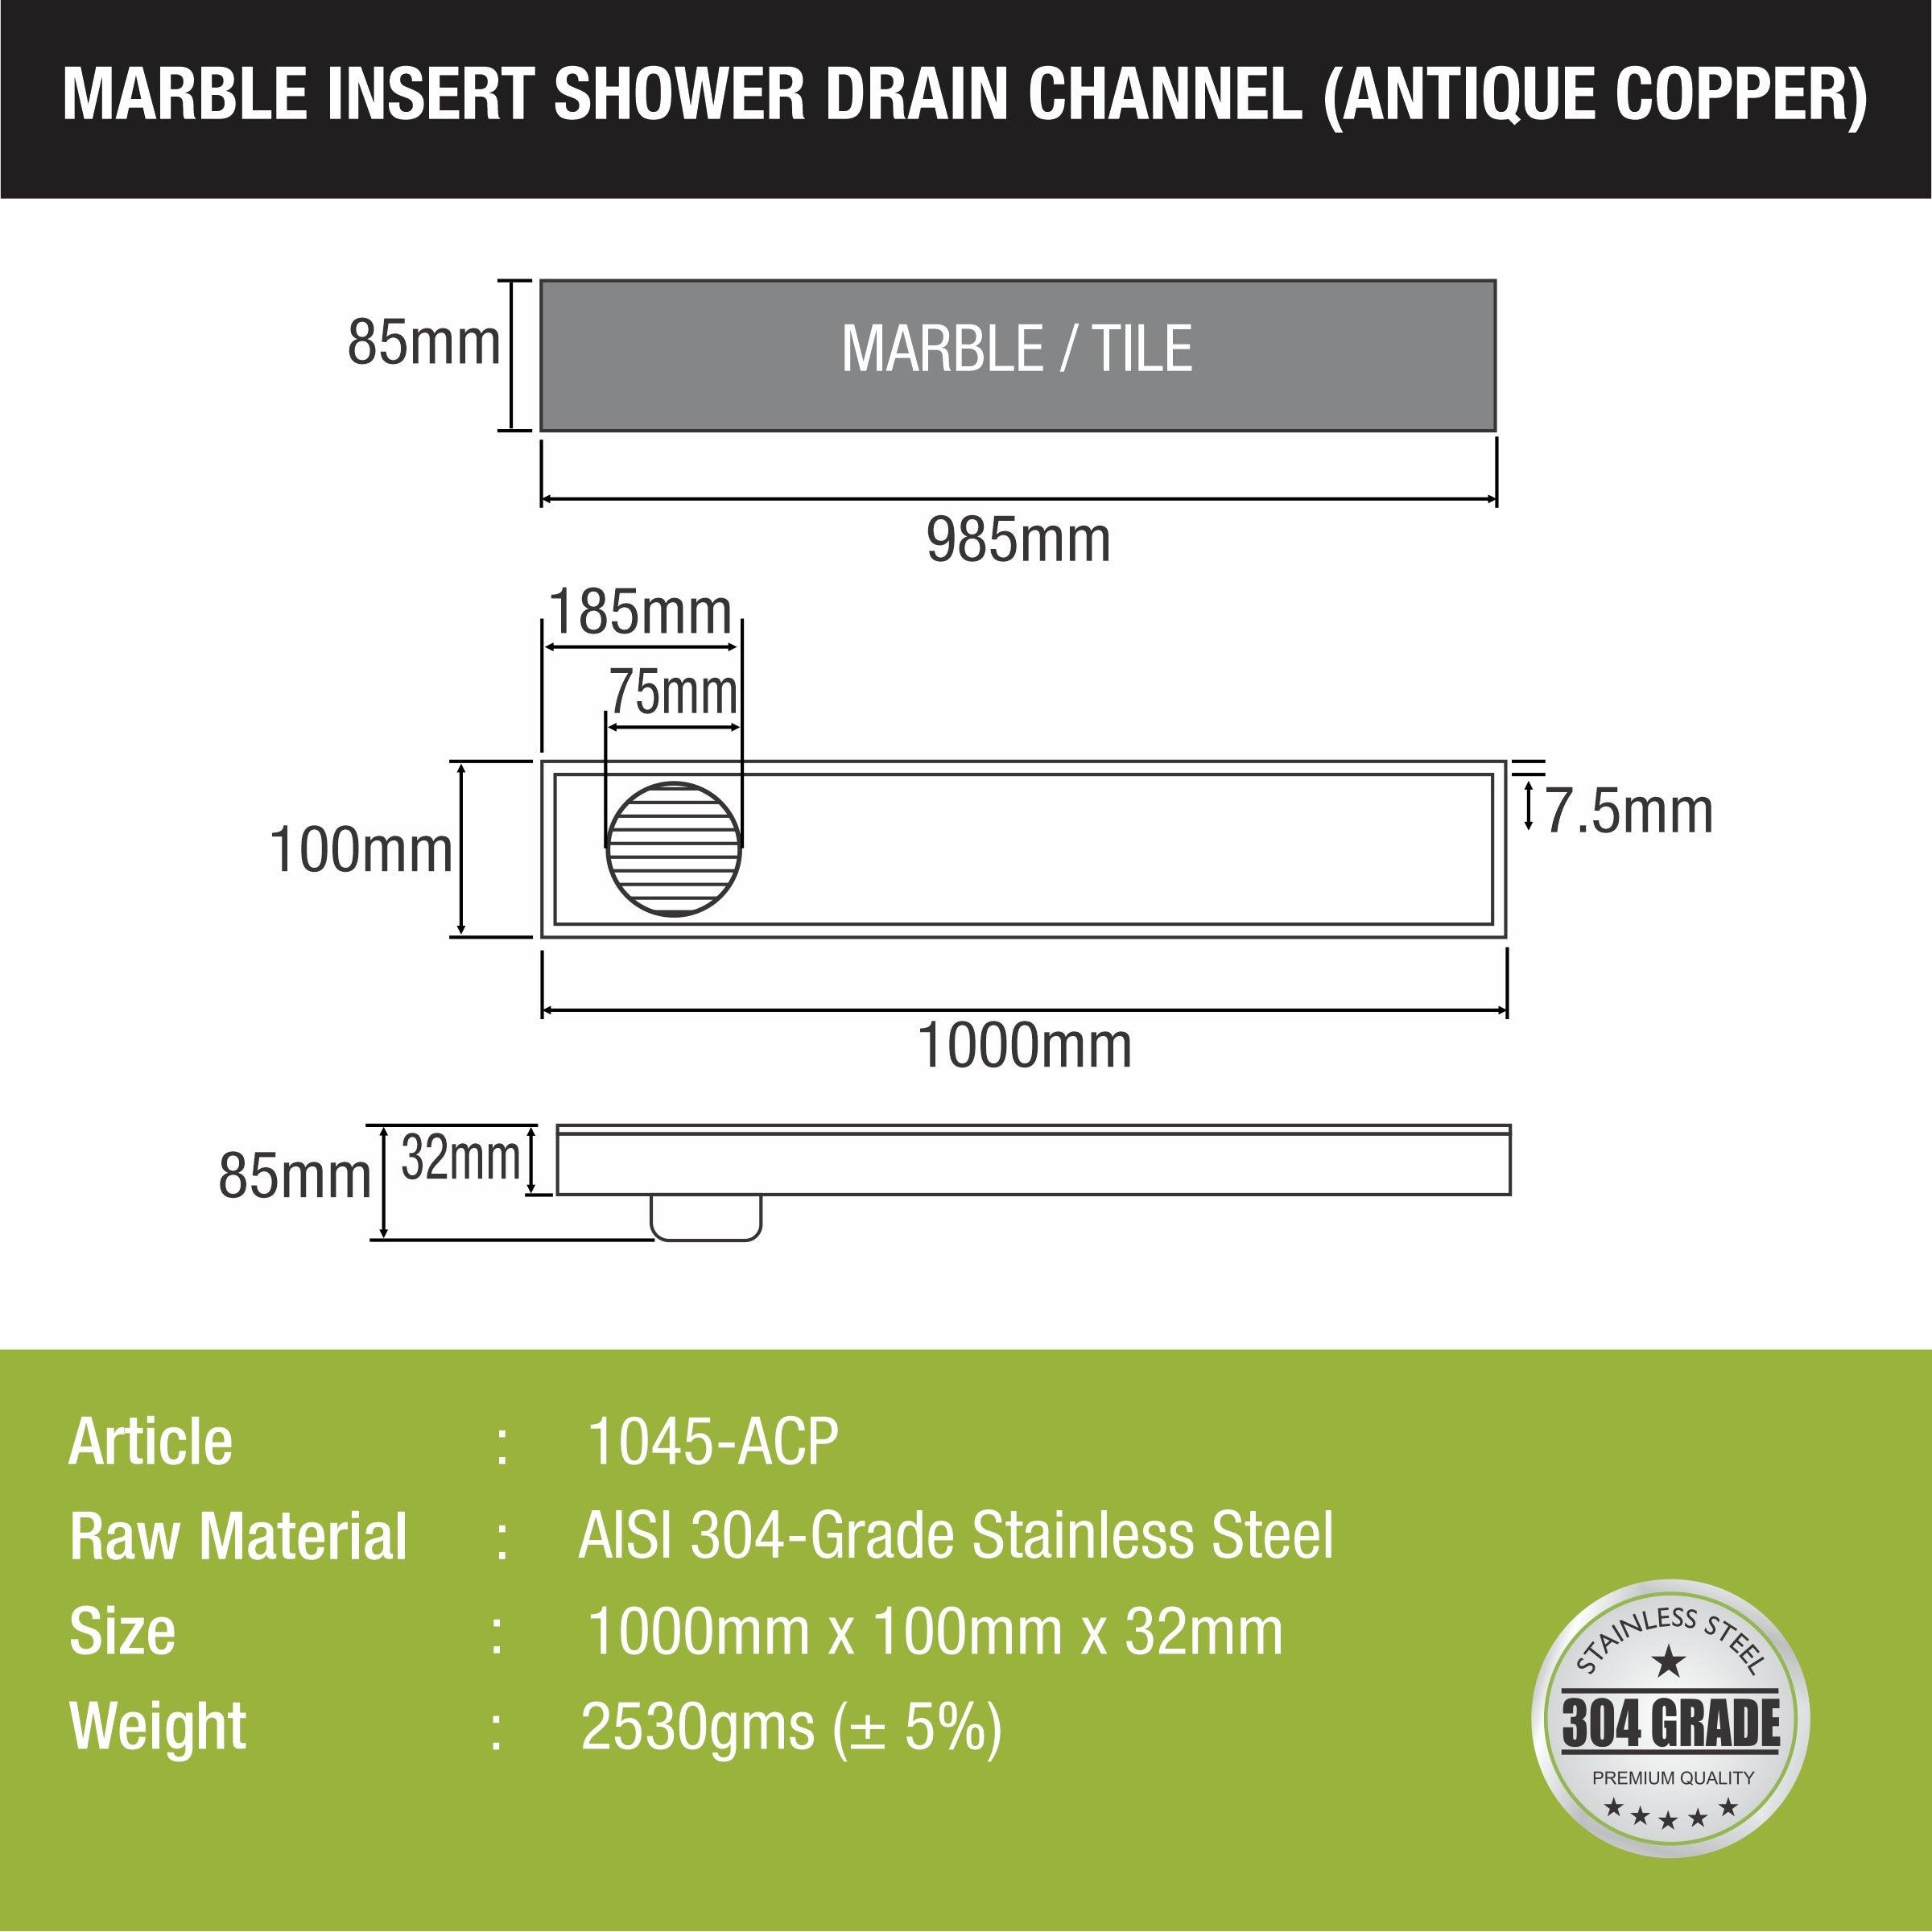 Marble Insert Shower Drain Channel - Antique Copper (40 x 4 Inches) sizes and dimensions